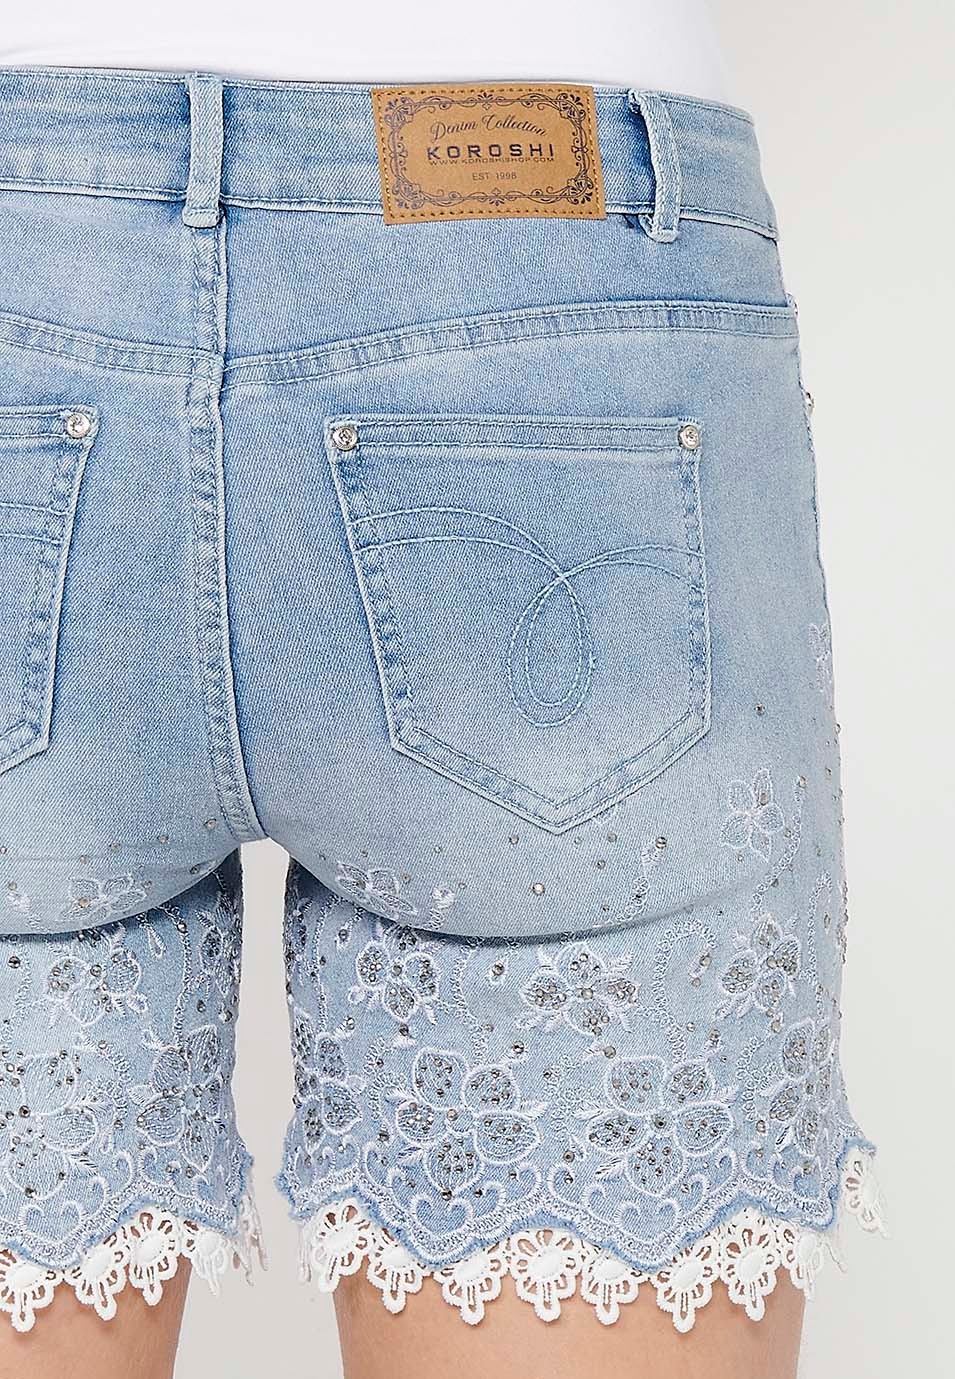 Short denim shorts finished with lace and floral embroidery with front closure with zipper and button with removable bow detail in Blue for Women 7